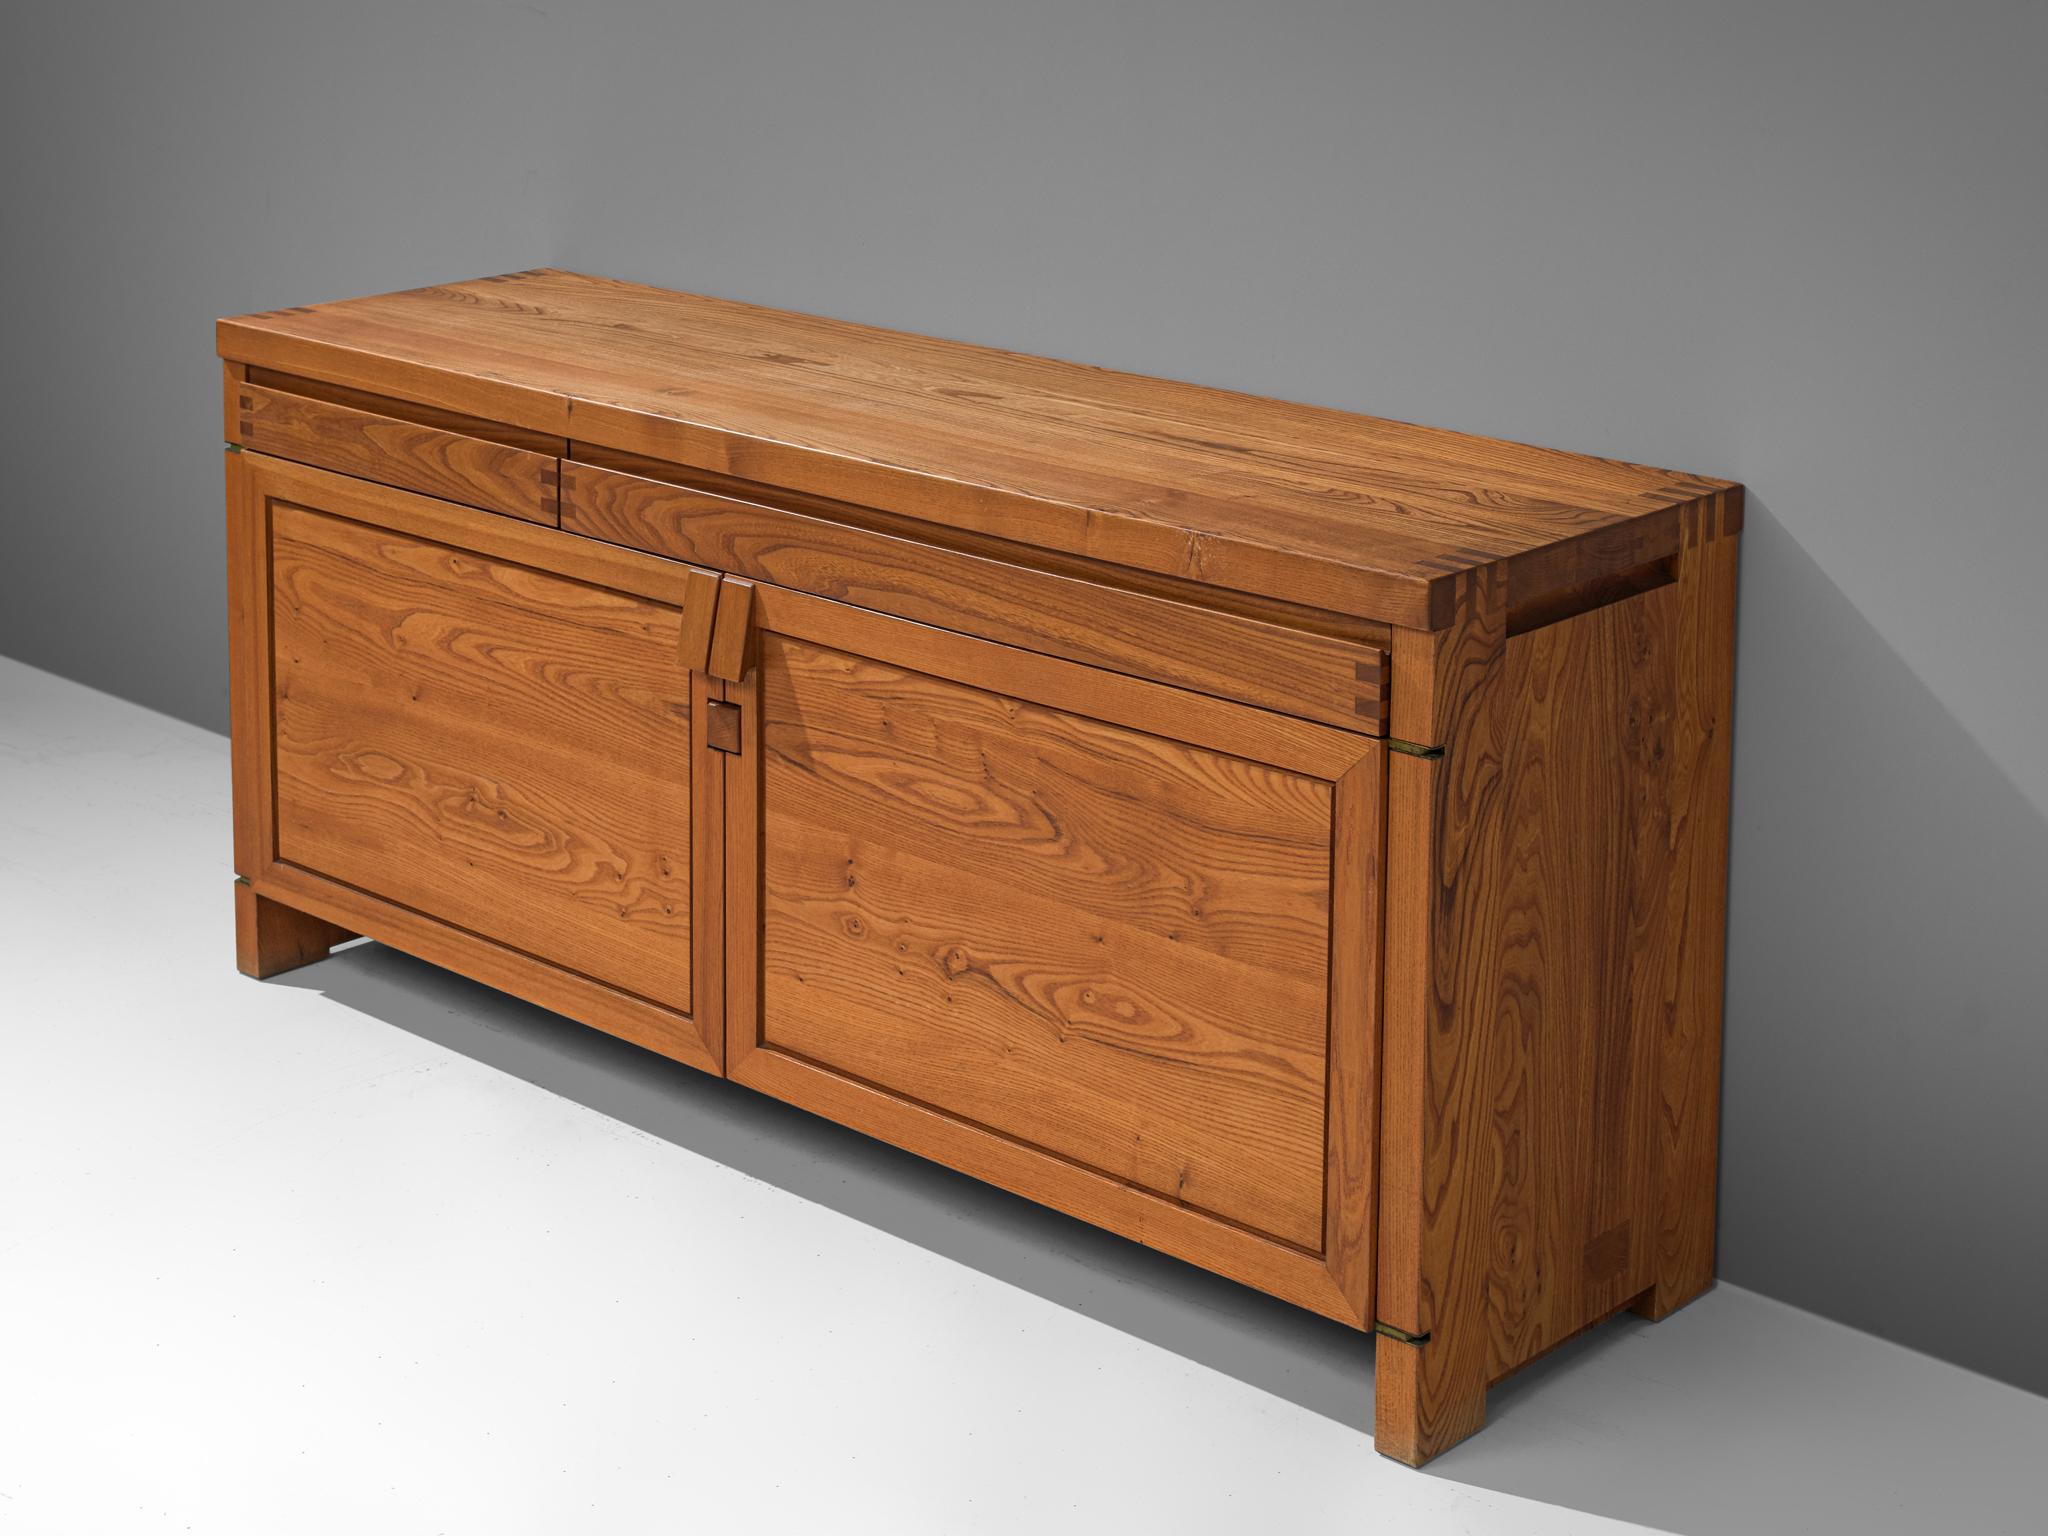 Pierre Chapo, sideboard, Model R08, elm, France, circa 1964.

This exquisitely crafted credenza combines a simplified yet complex design combined with nifty, solid construction details that characterize Chapo's work. The well-proportioned doors and